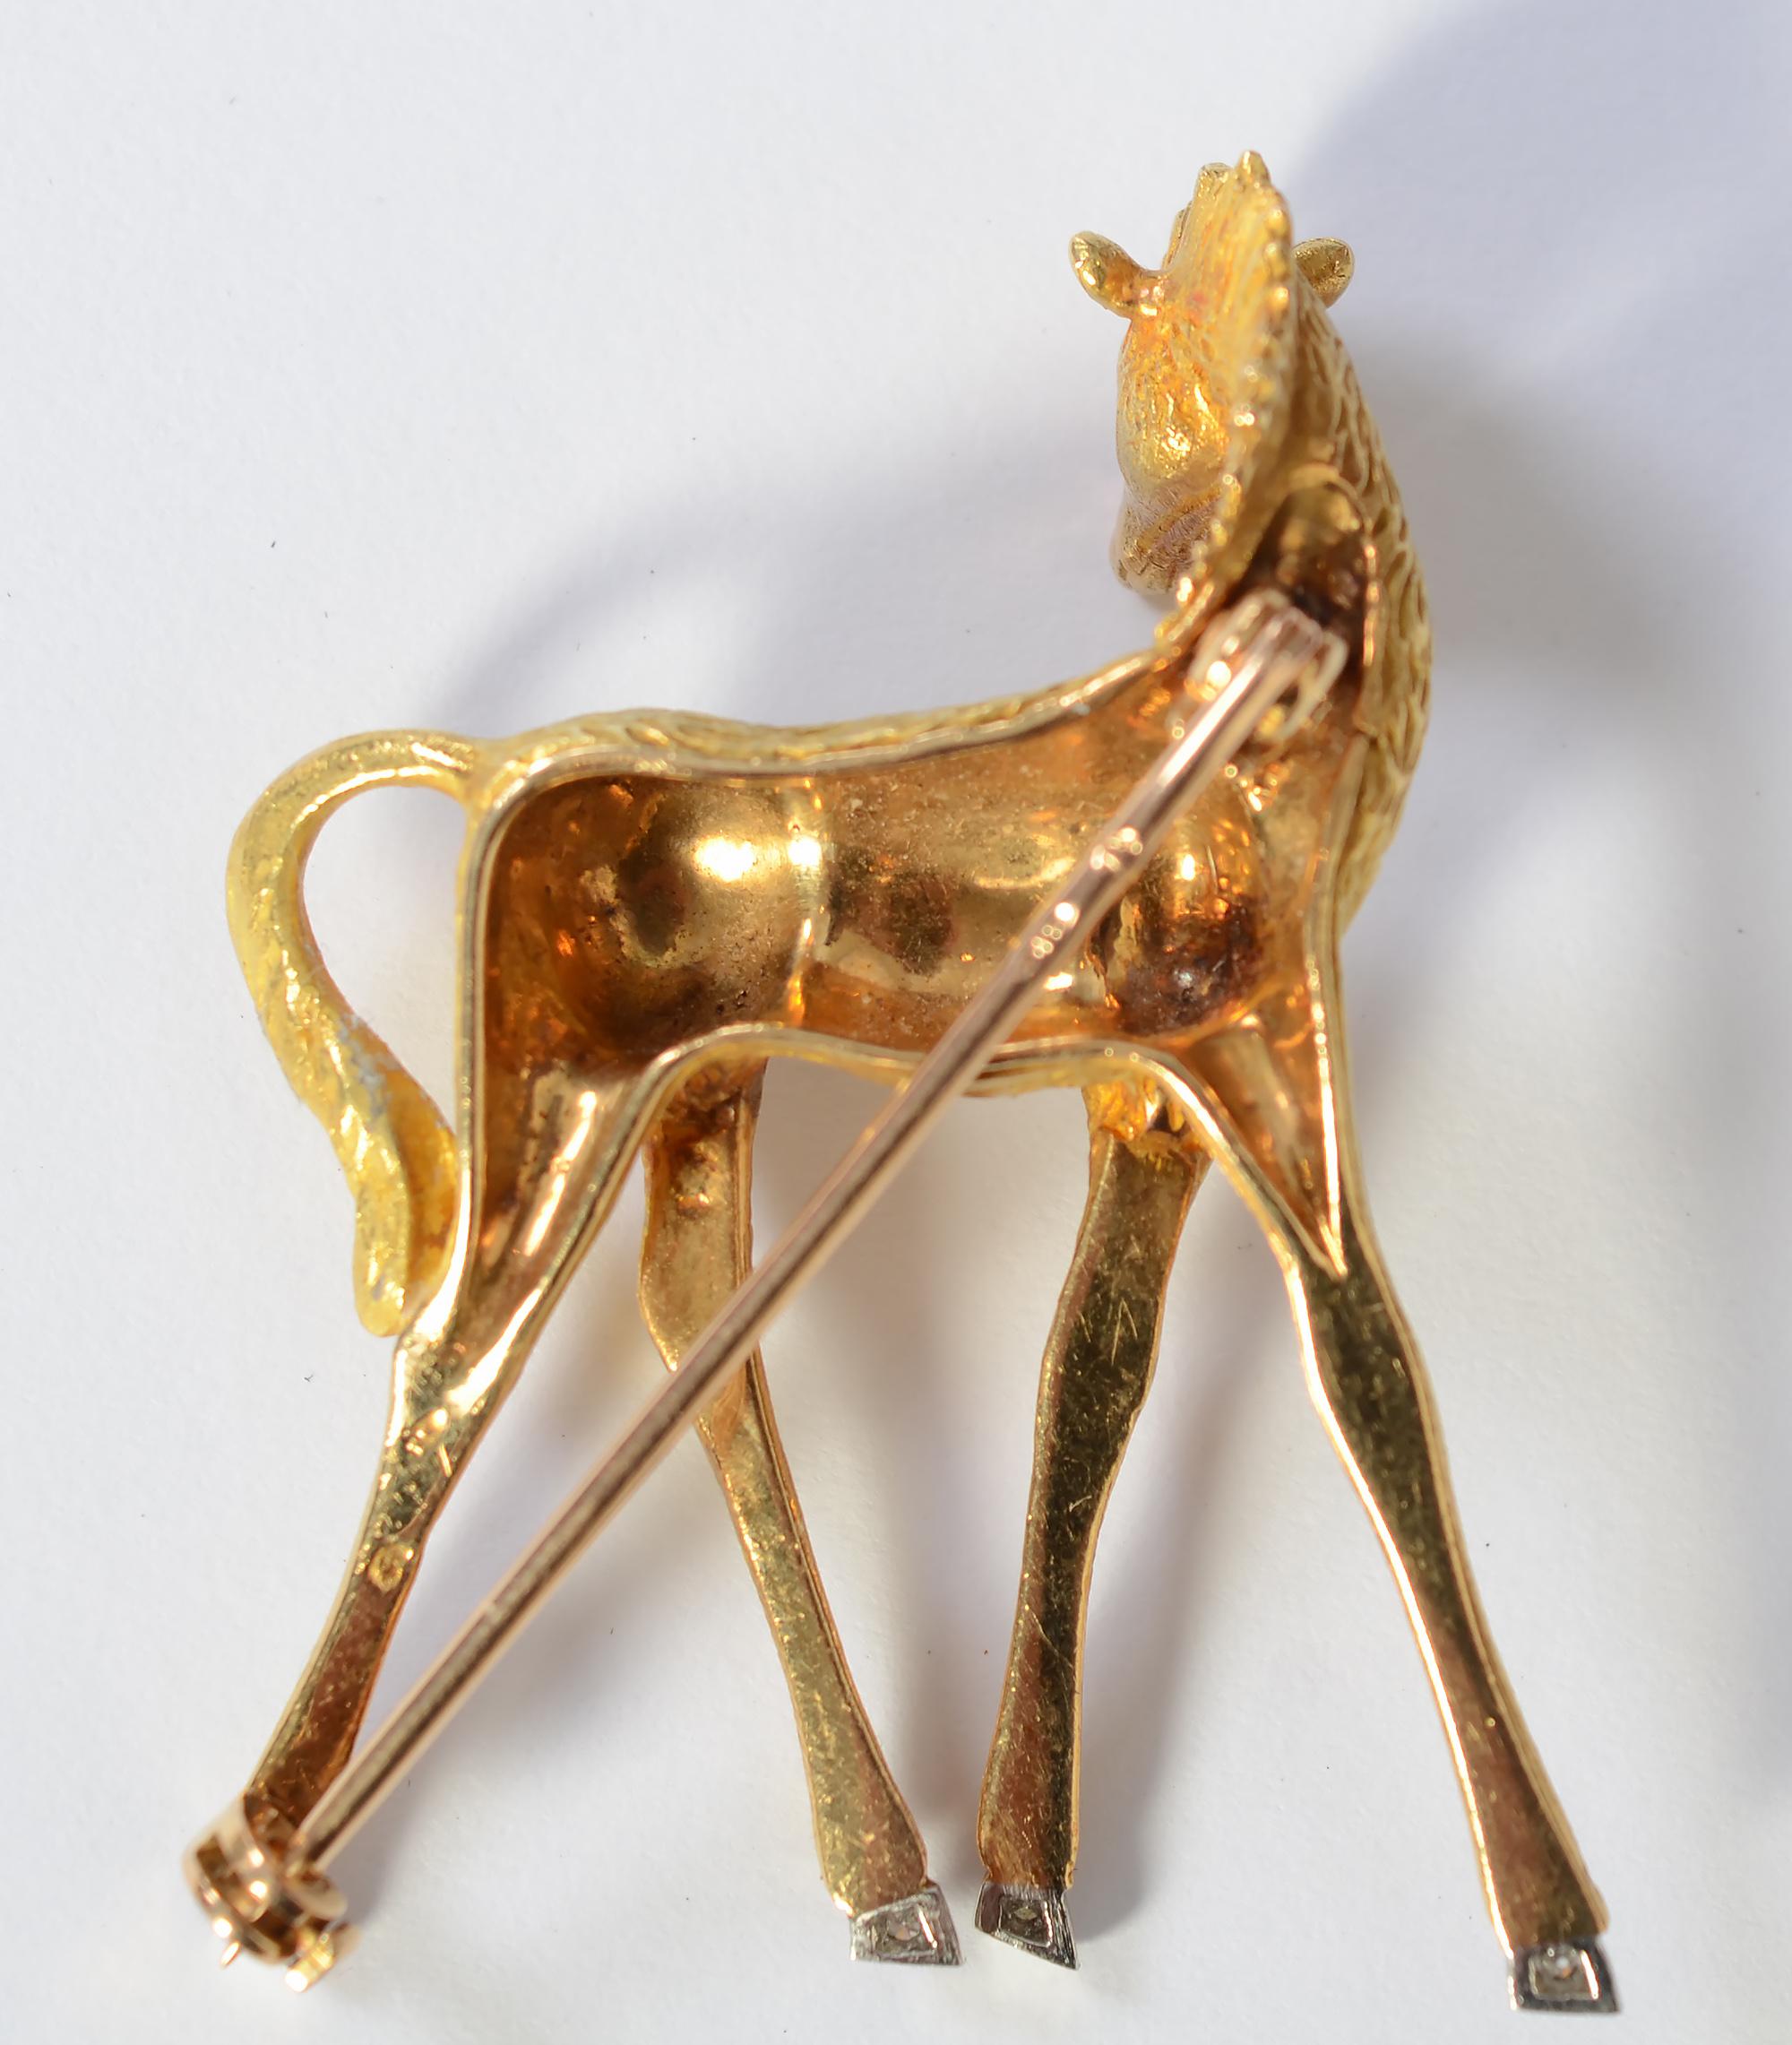 Beautifully detailed 18 karat  brooch of a baby giraffe. It has multiple textures representing the body; tail and mane Each hoof has a diamond. The brooch measures 1 3/4 inches tall and 1 1/4 inches wide. French hallmarks.